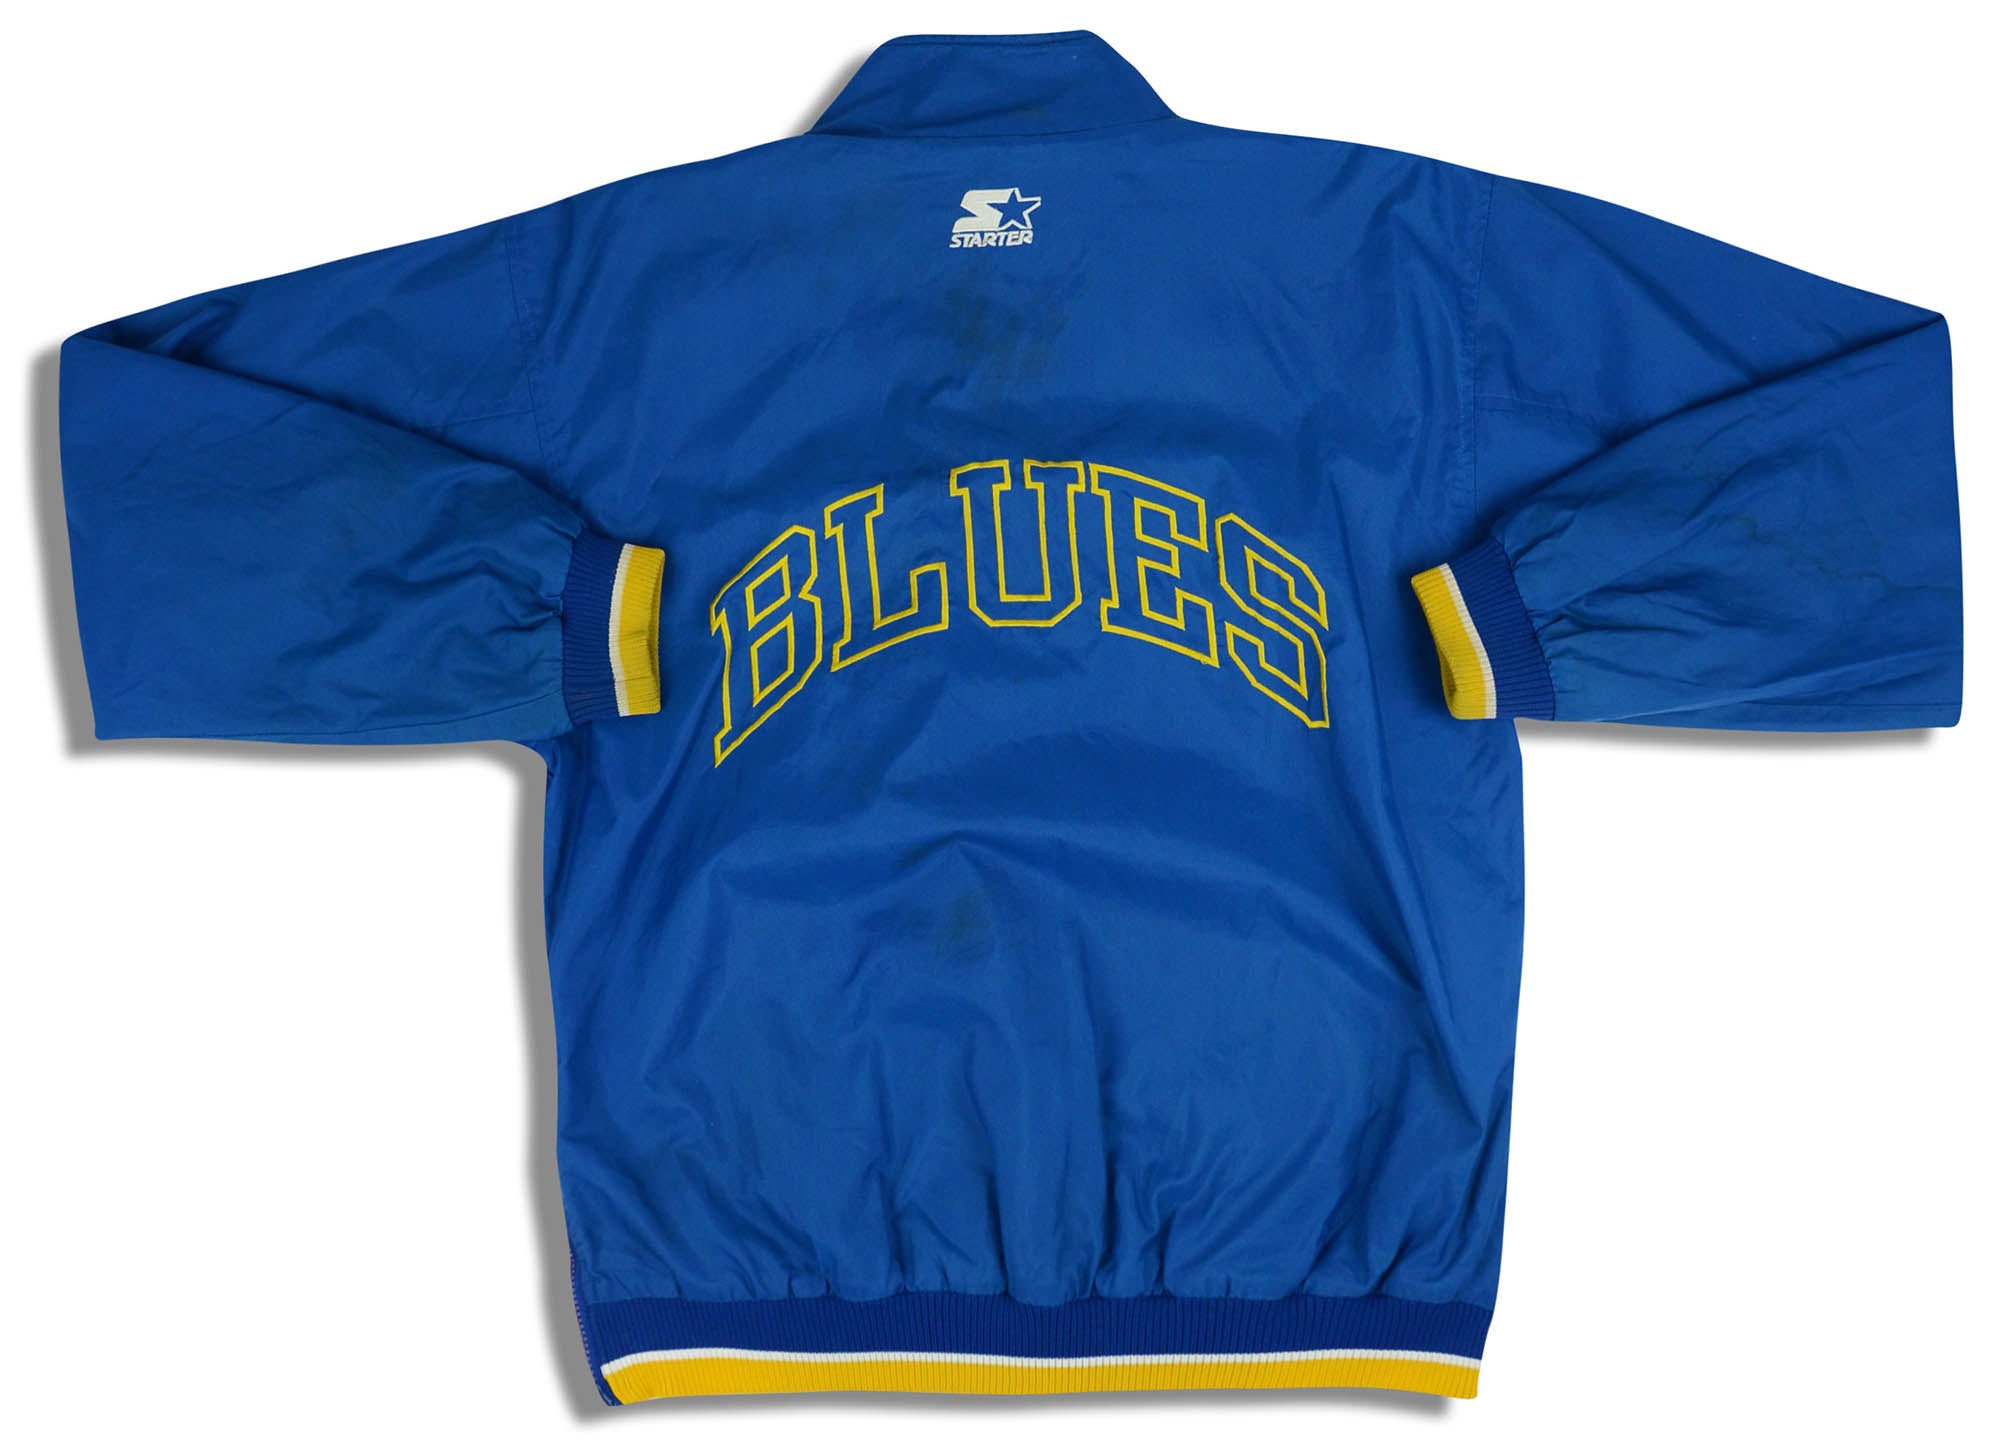 St. Louis Blues Firstar Gamewear Pro Performance Hockey Jersey with Cu 